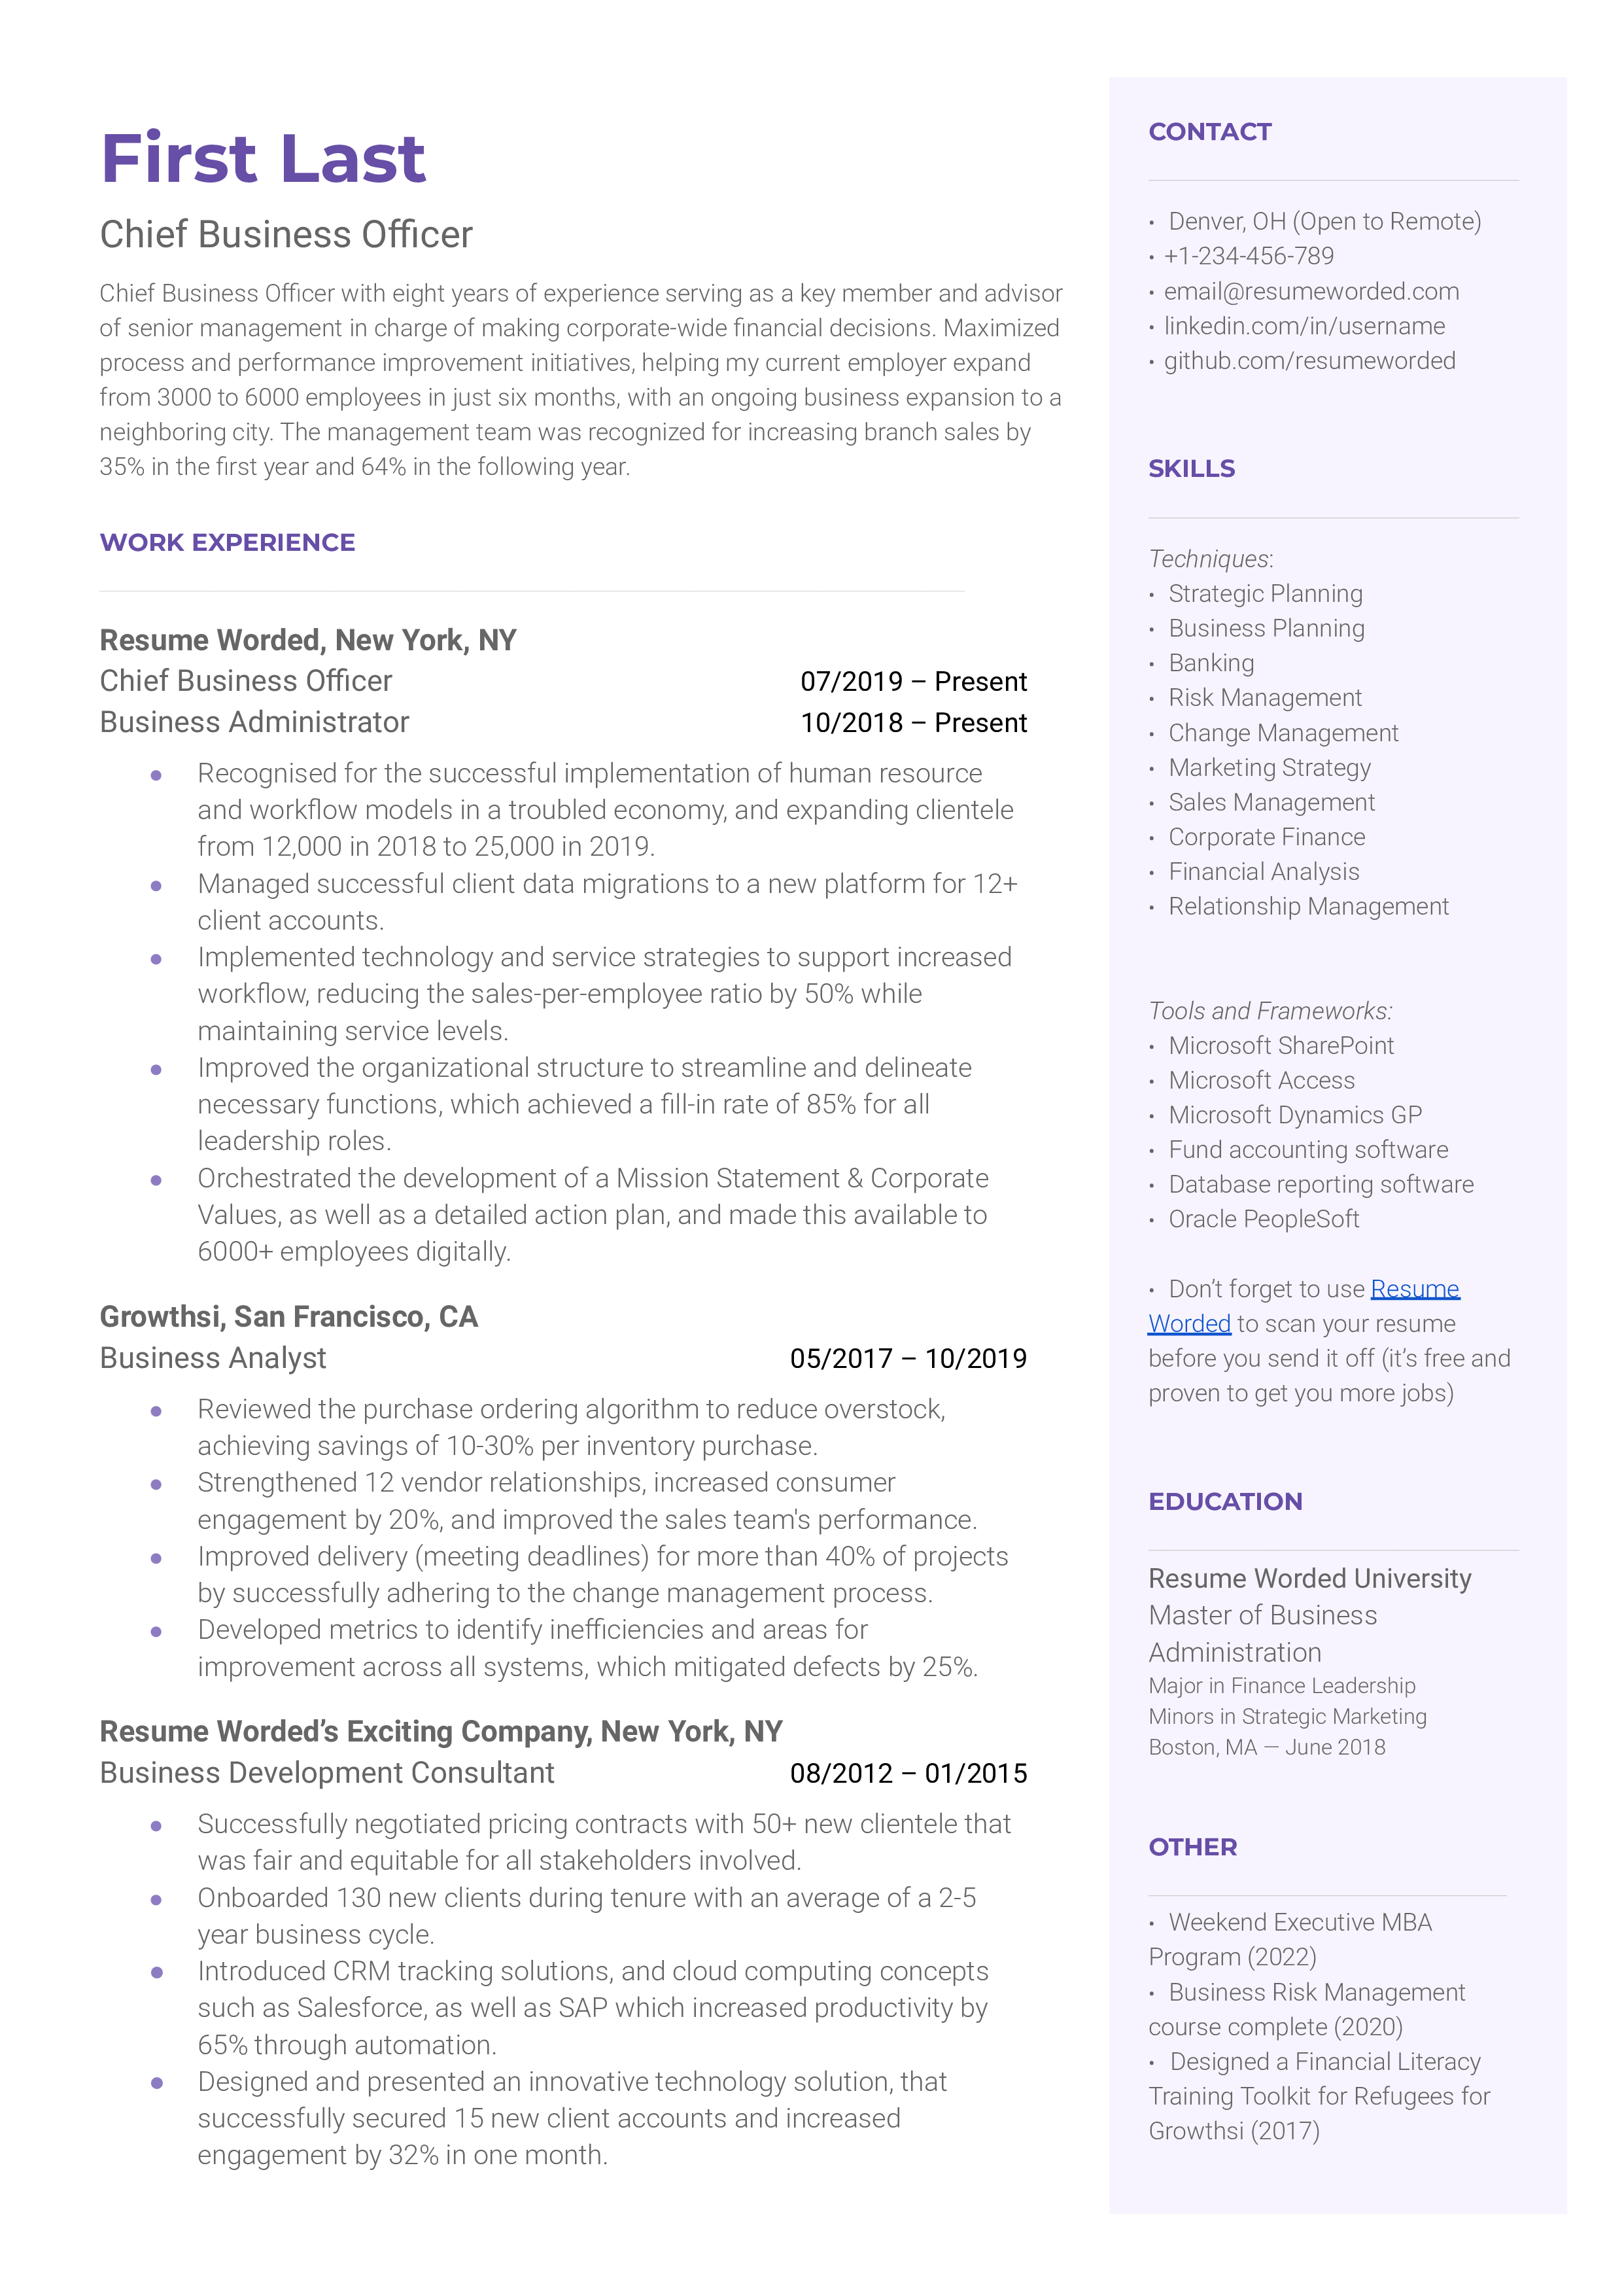 Chief Business Officer Resume Template + Example